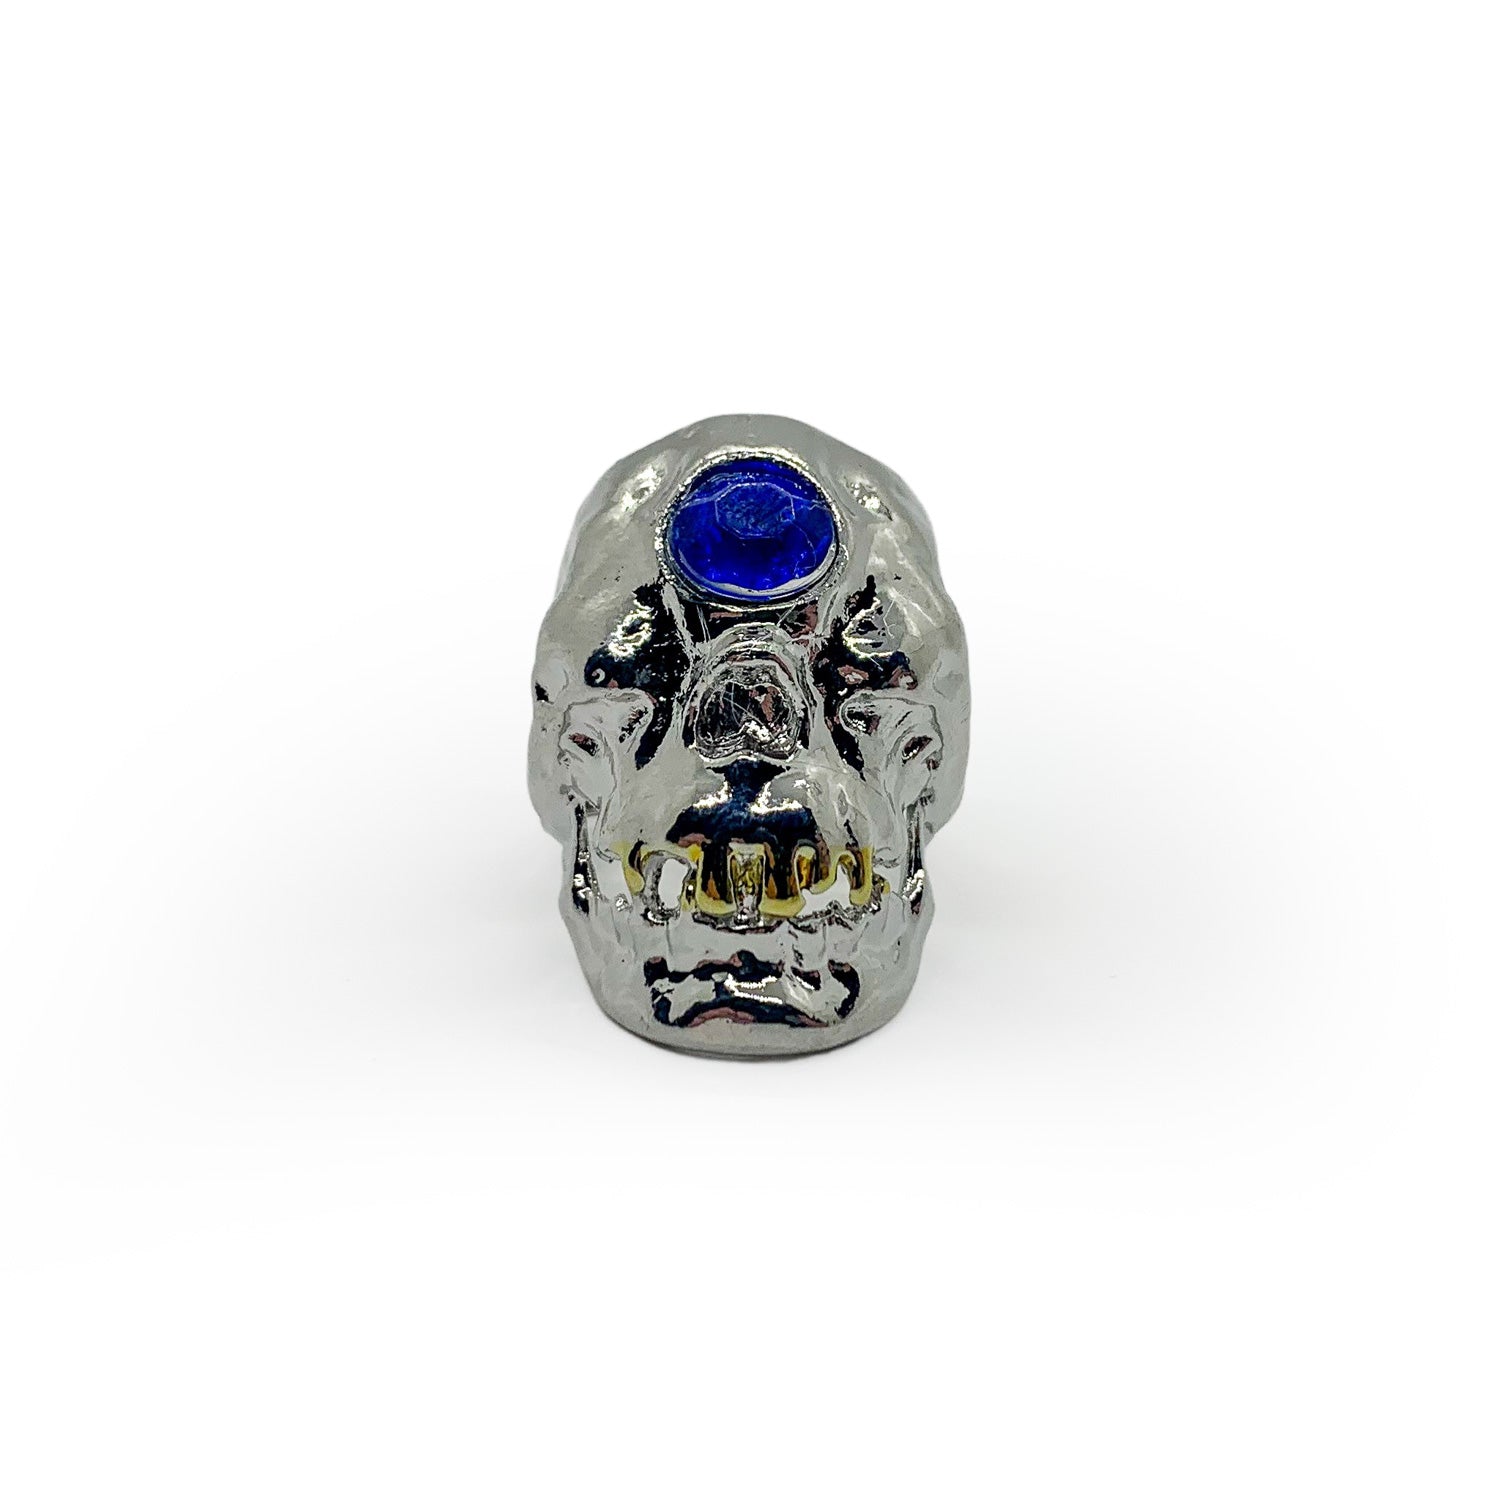 Skull Ring with Blue Gemstone and Gold Teeth - US Size 9